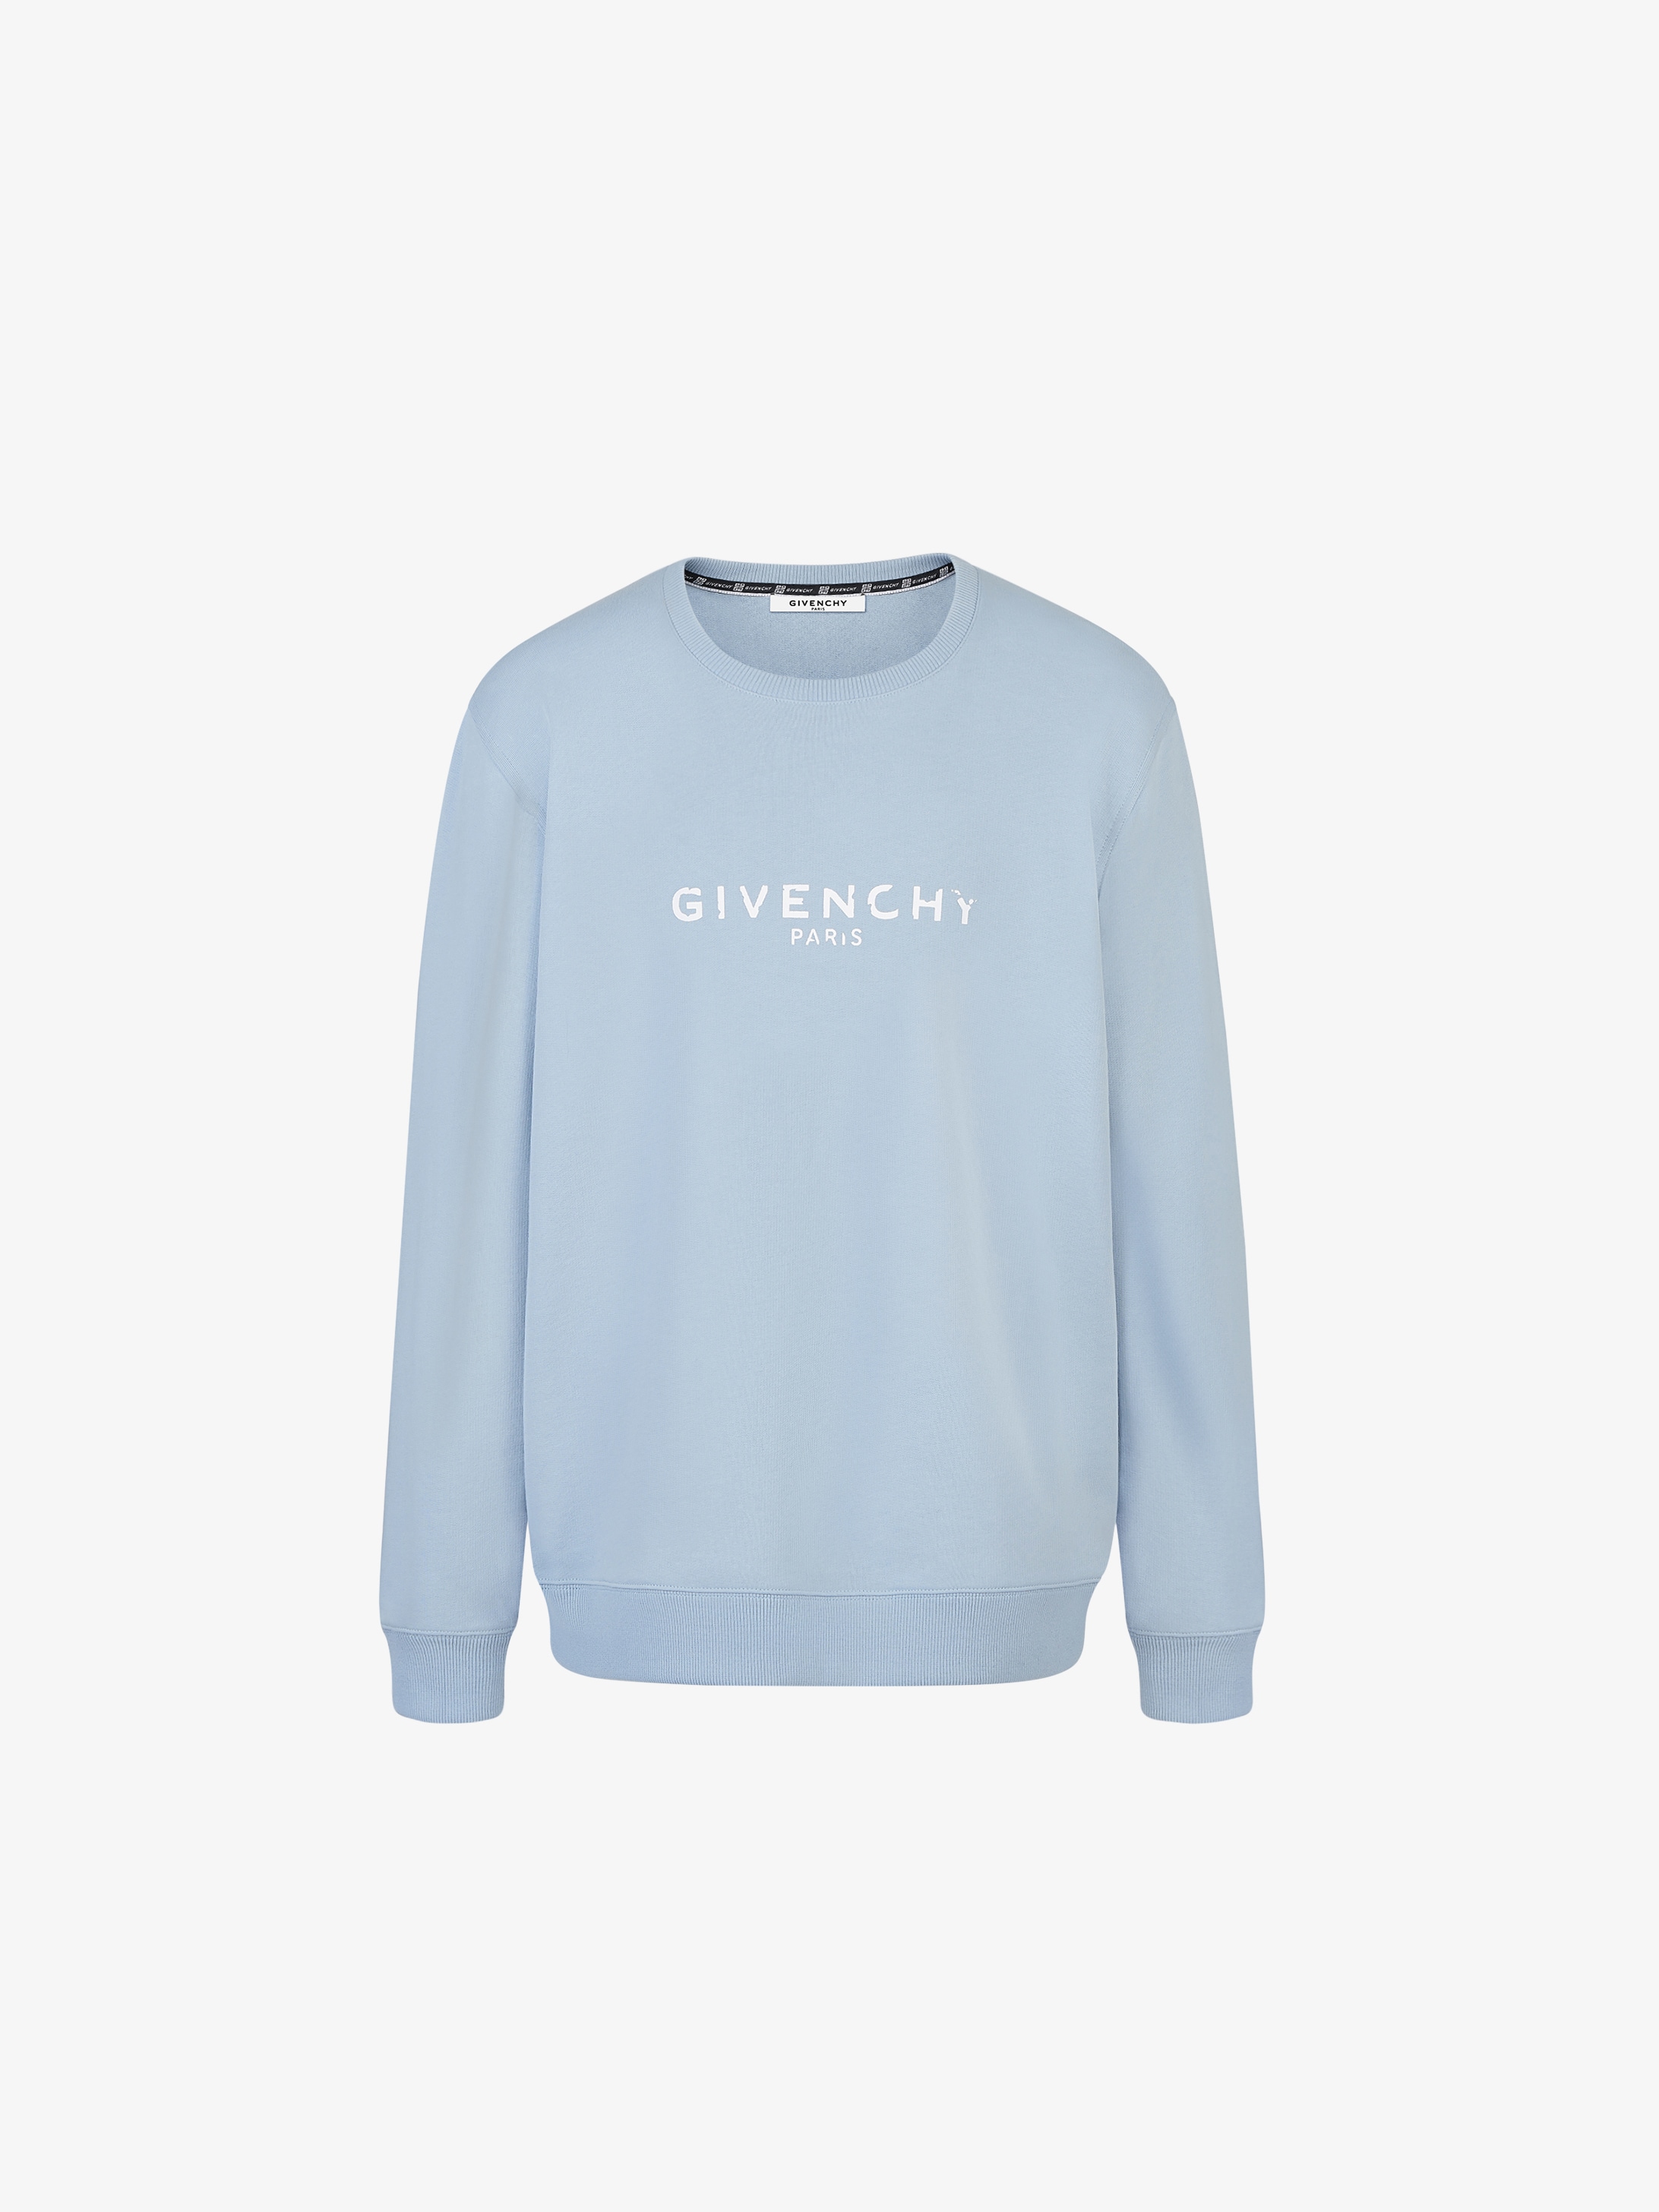 givenchy sweater blue